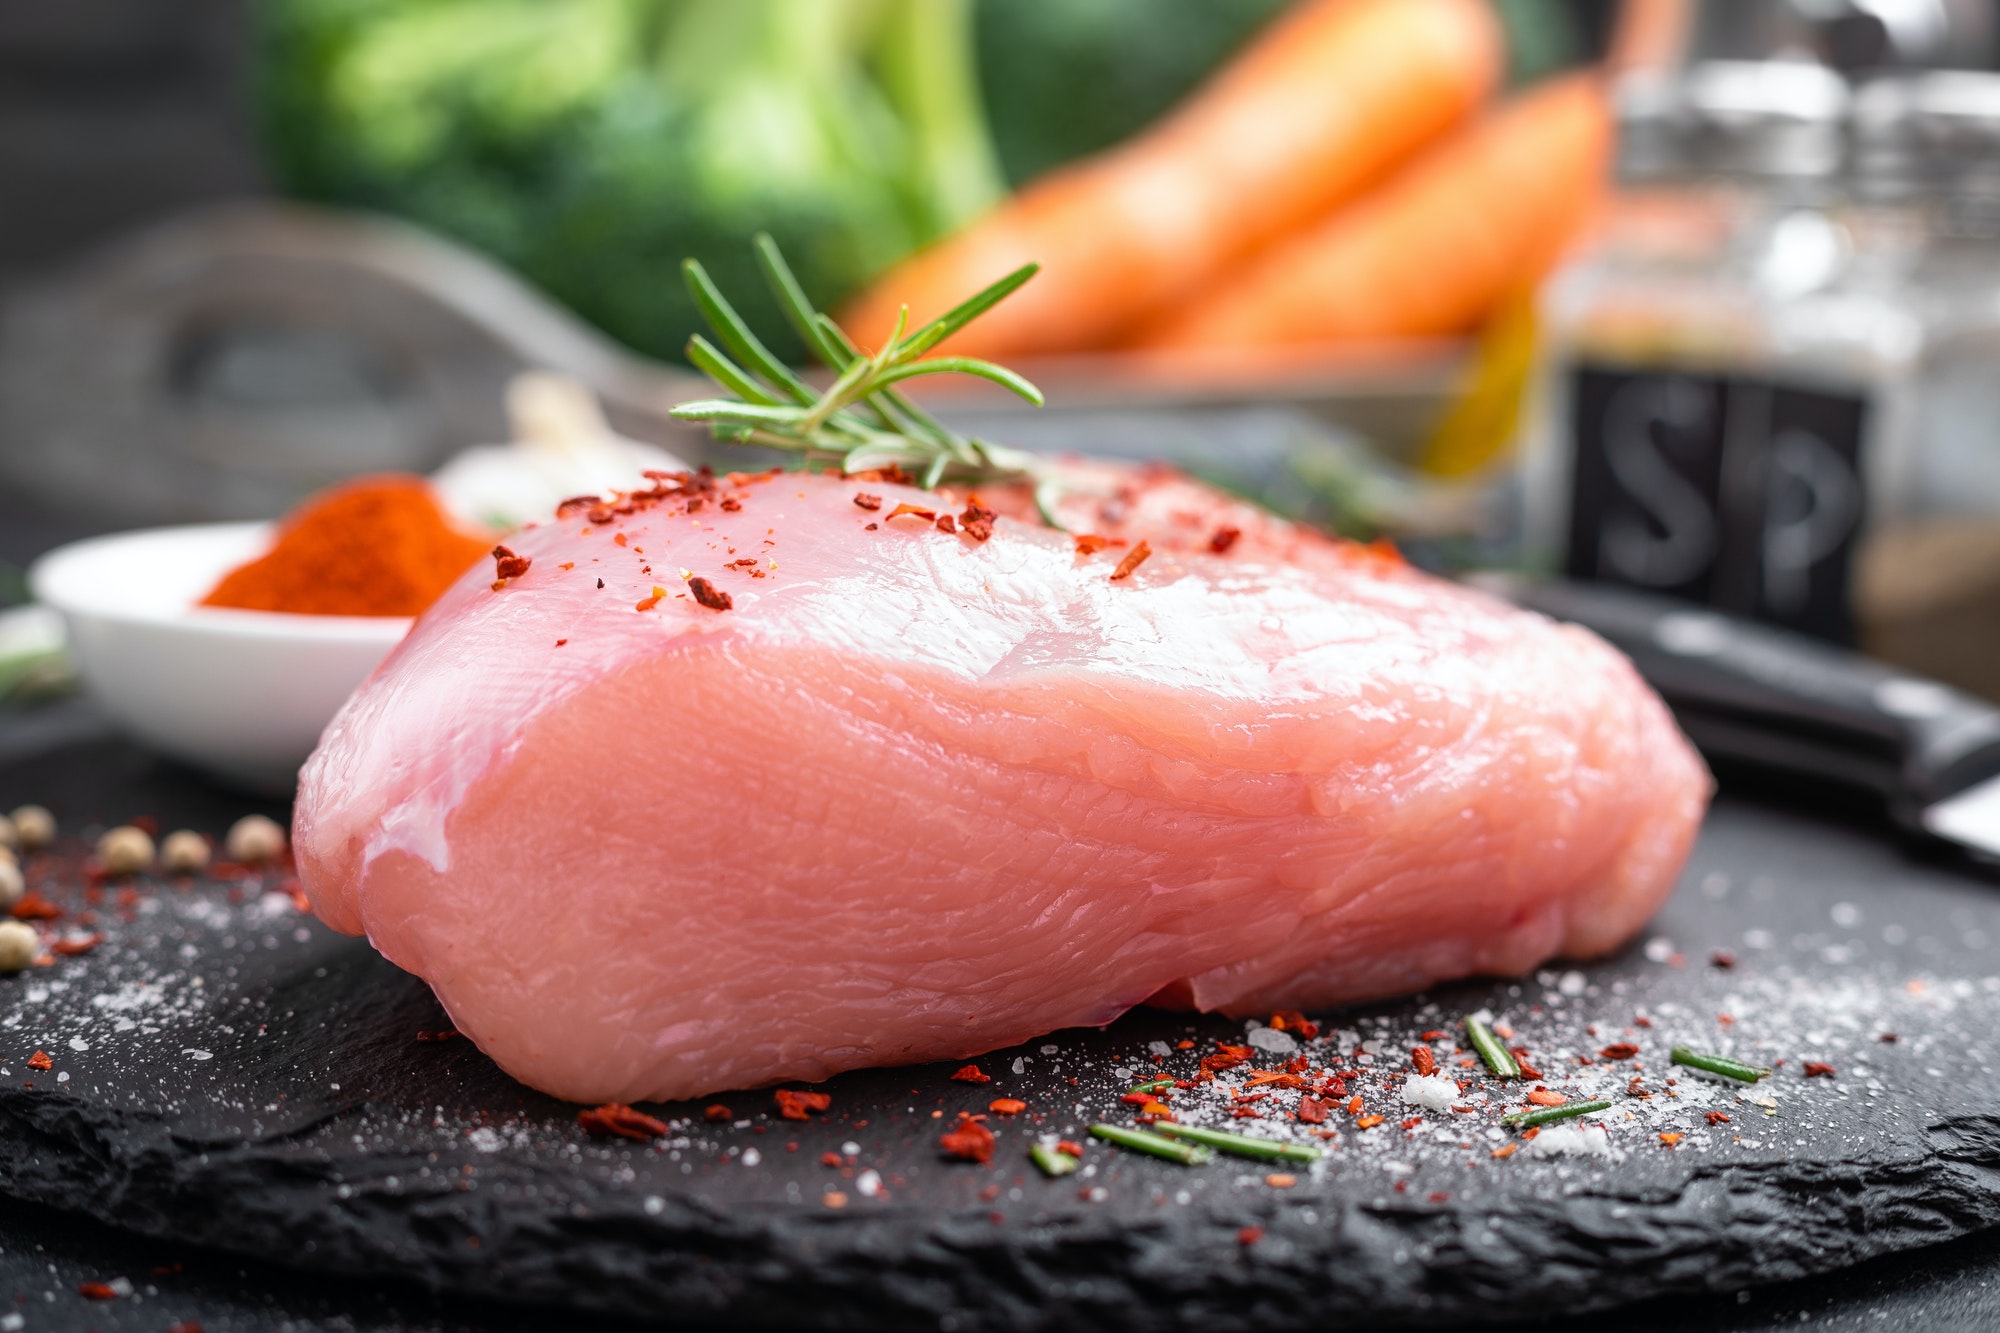 Fresh raw turkey meat fillet with ingredients for cooking